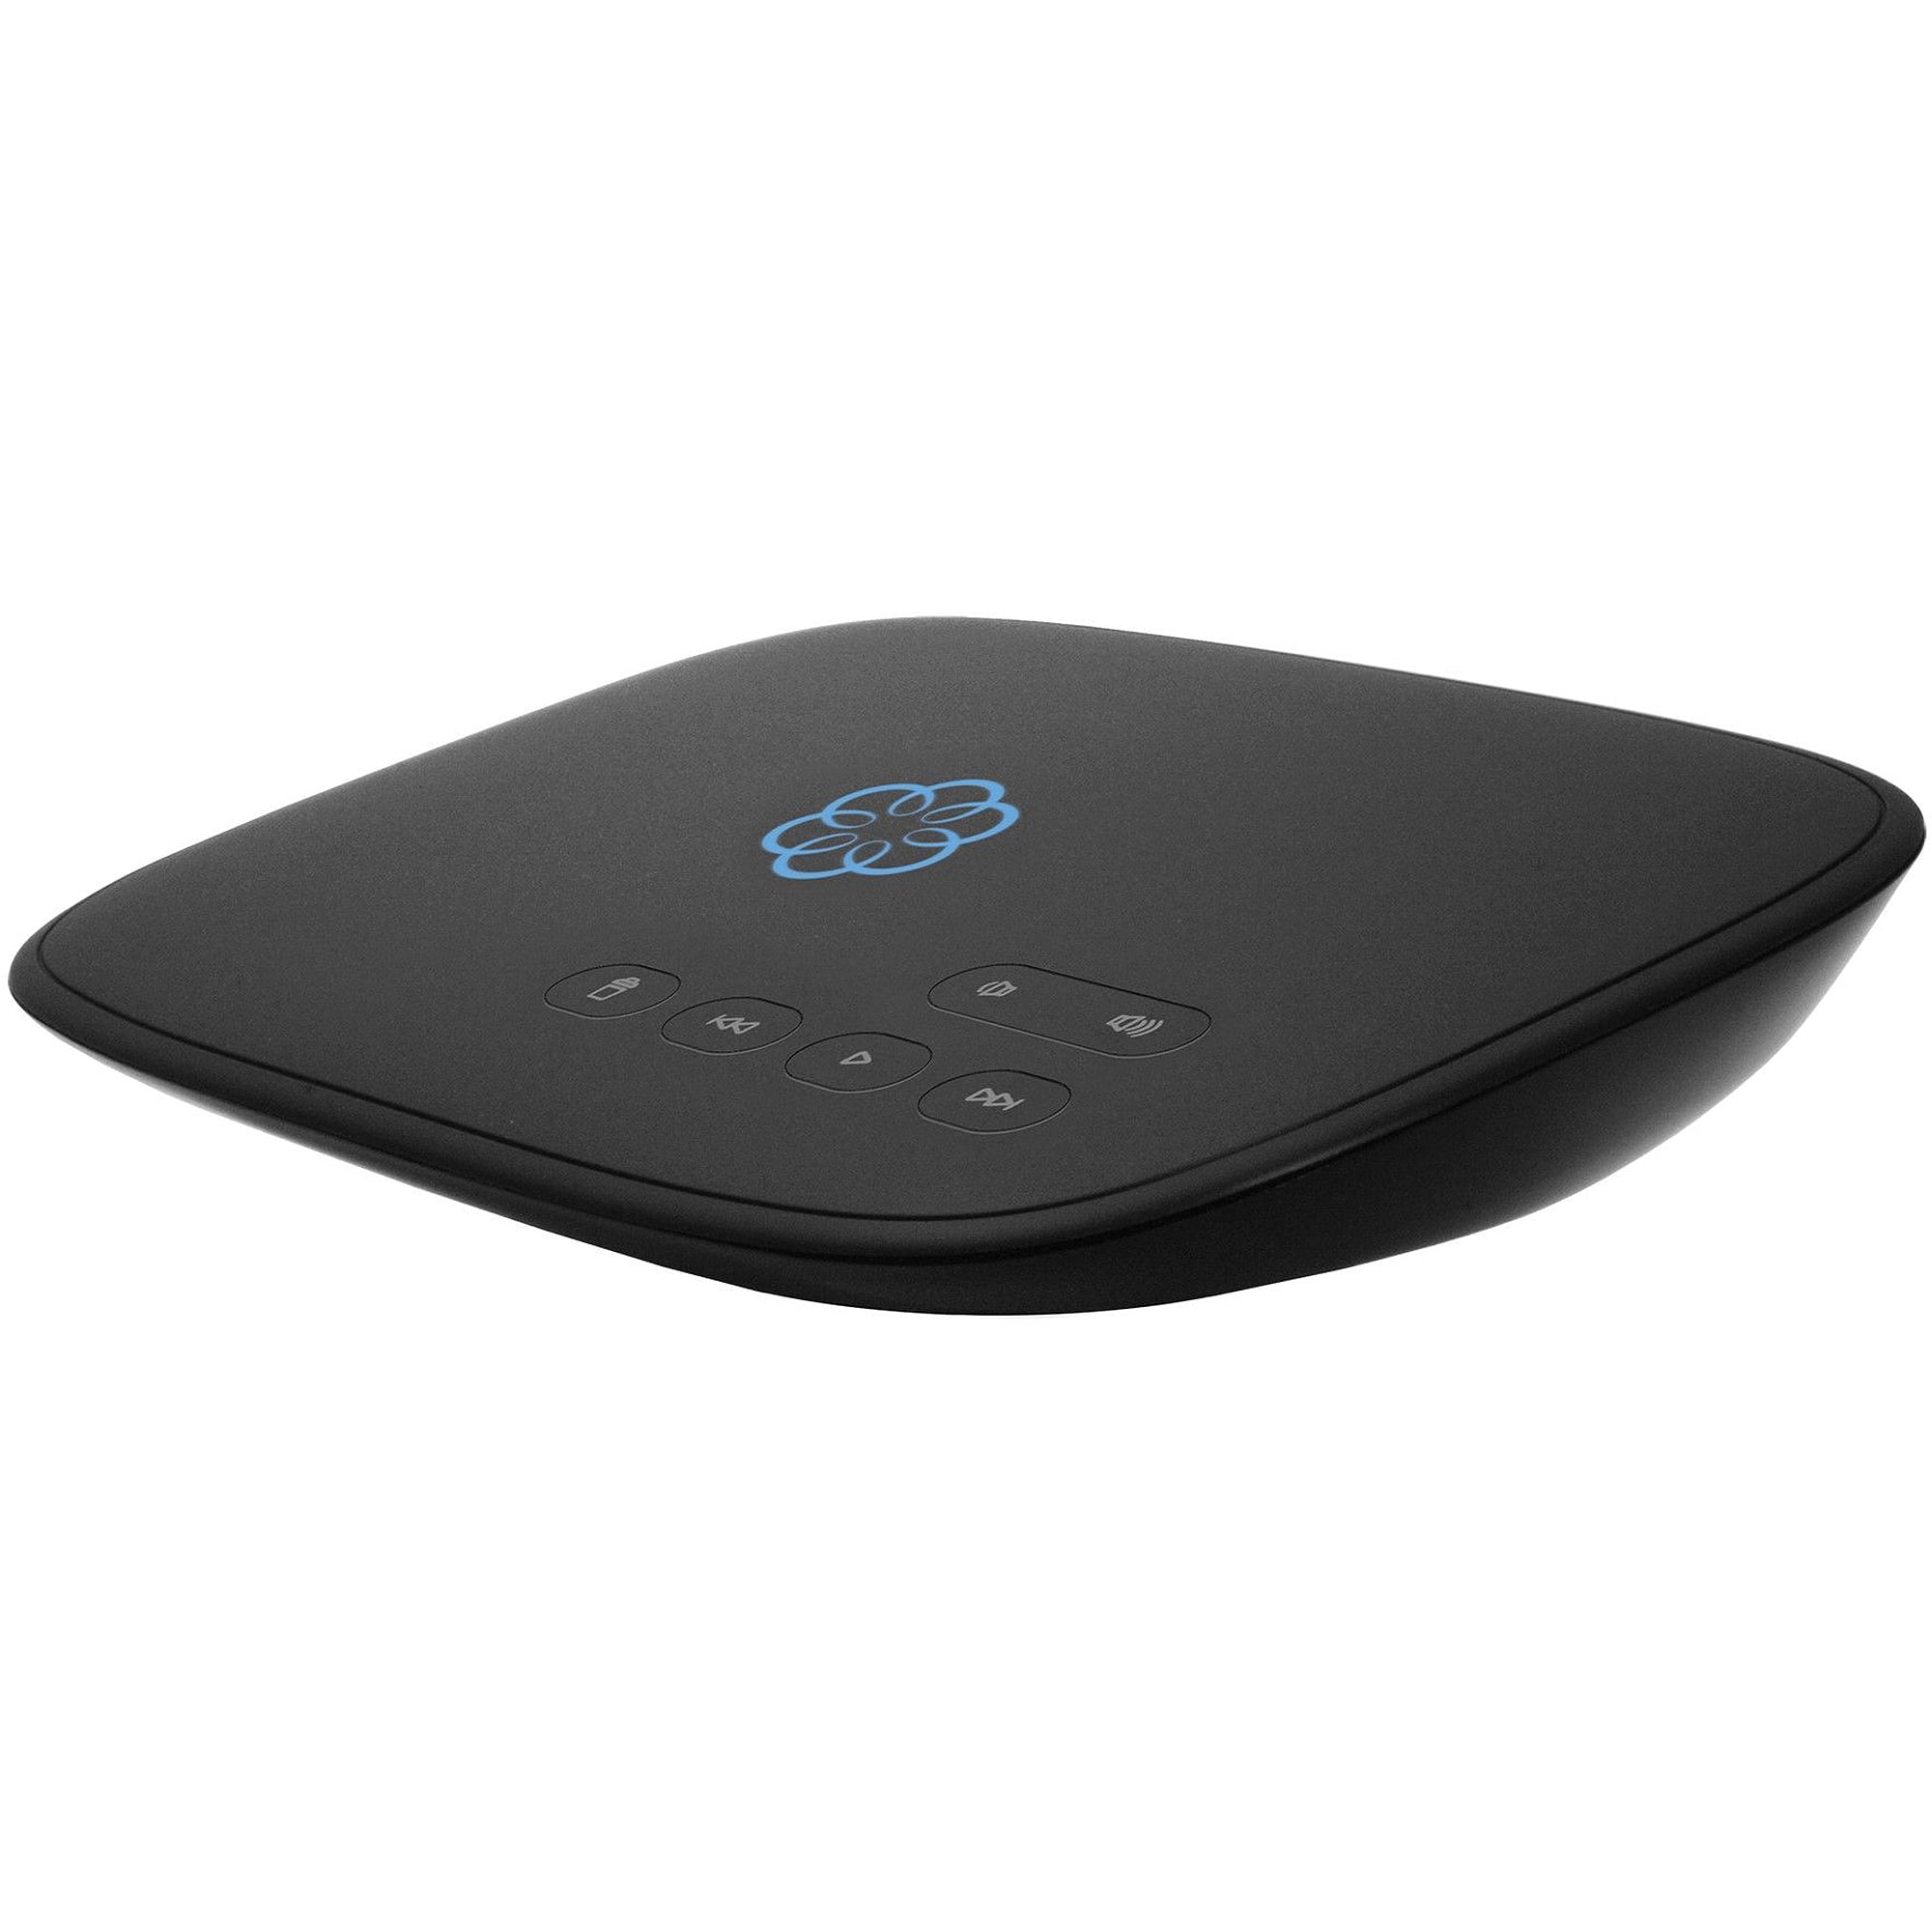 Works During Power and Internet outages Option to Block Robocalls. Affordable Internet-Based landline Replacement Ooma Telo 4G VoIP Home Phone and Backup Internet Service